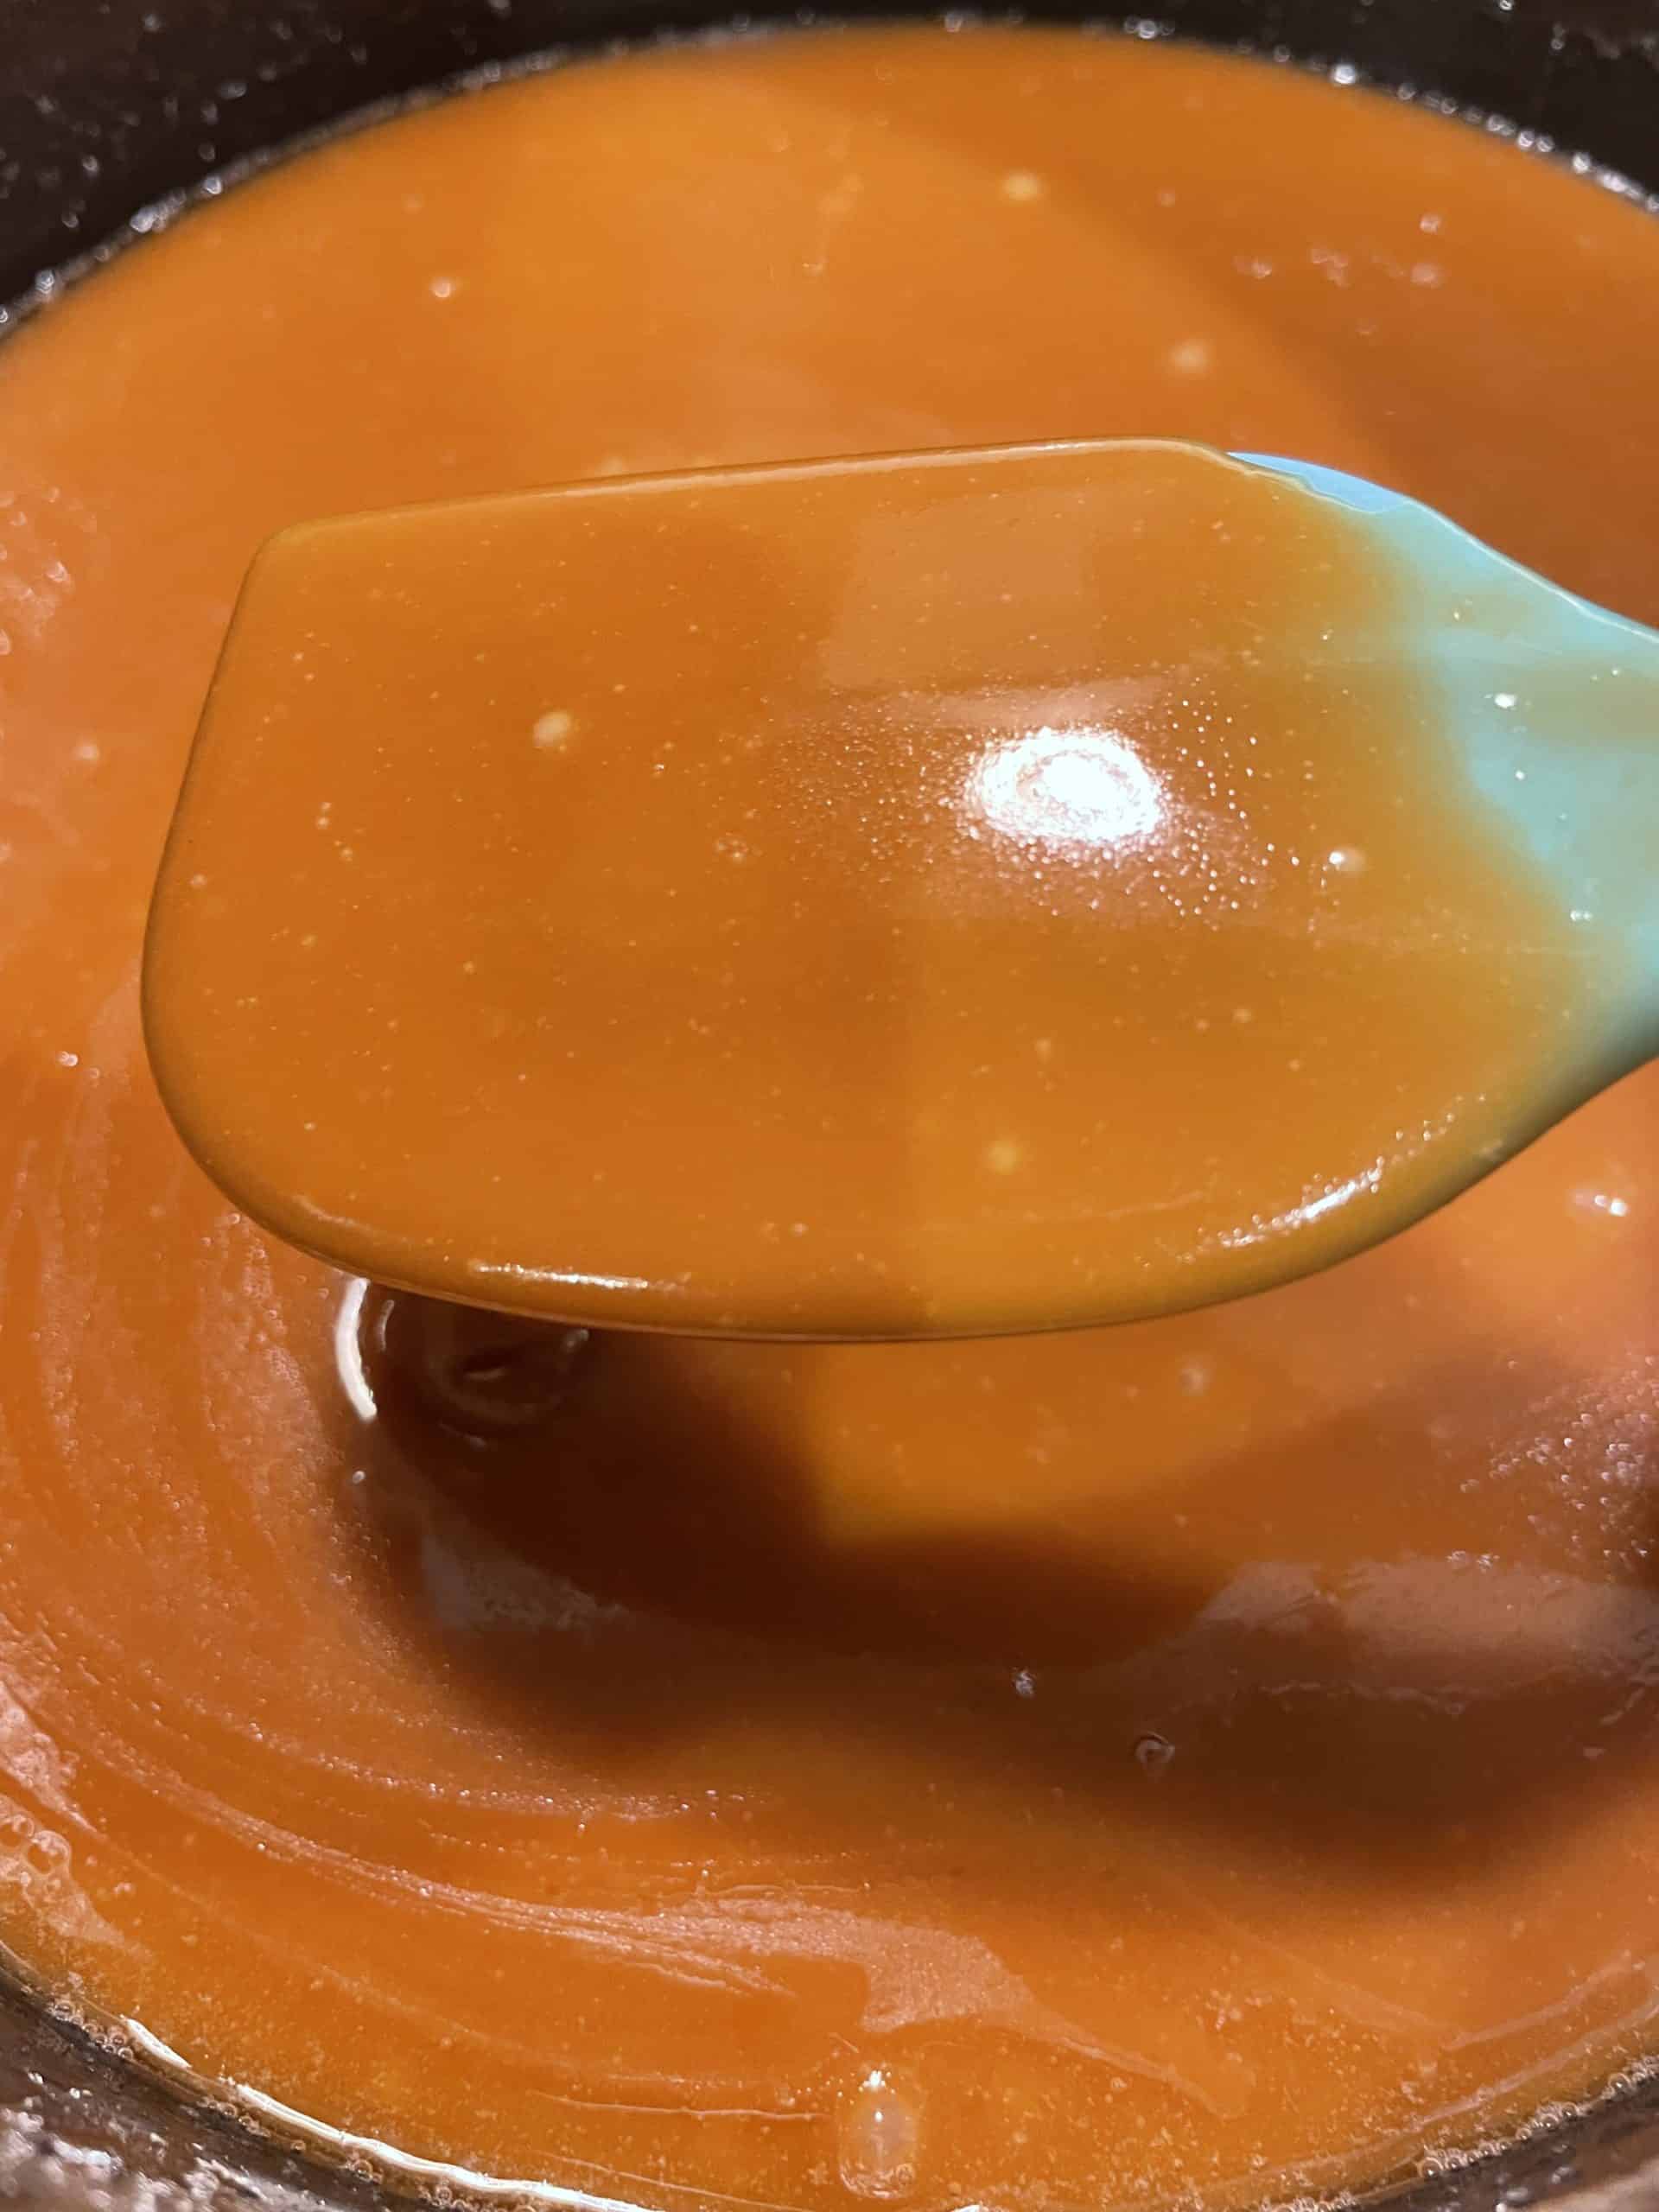 Fully cooked hot caramel